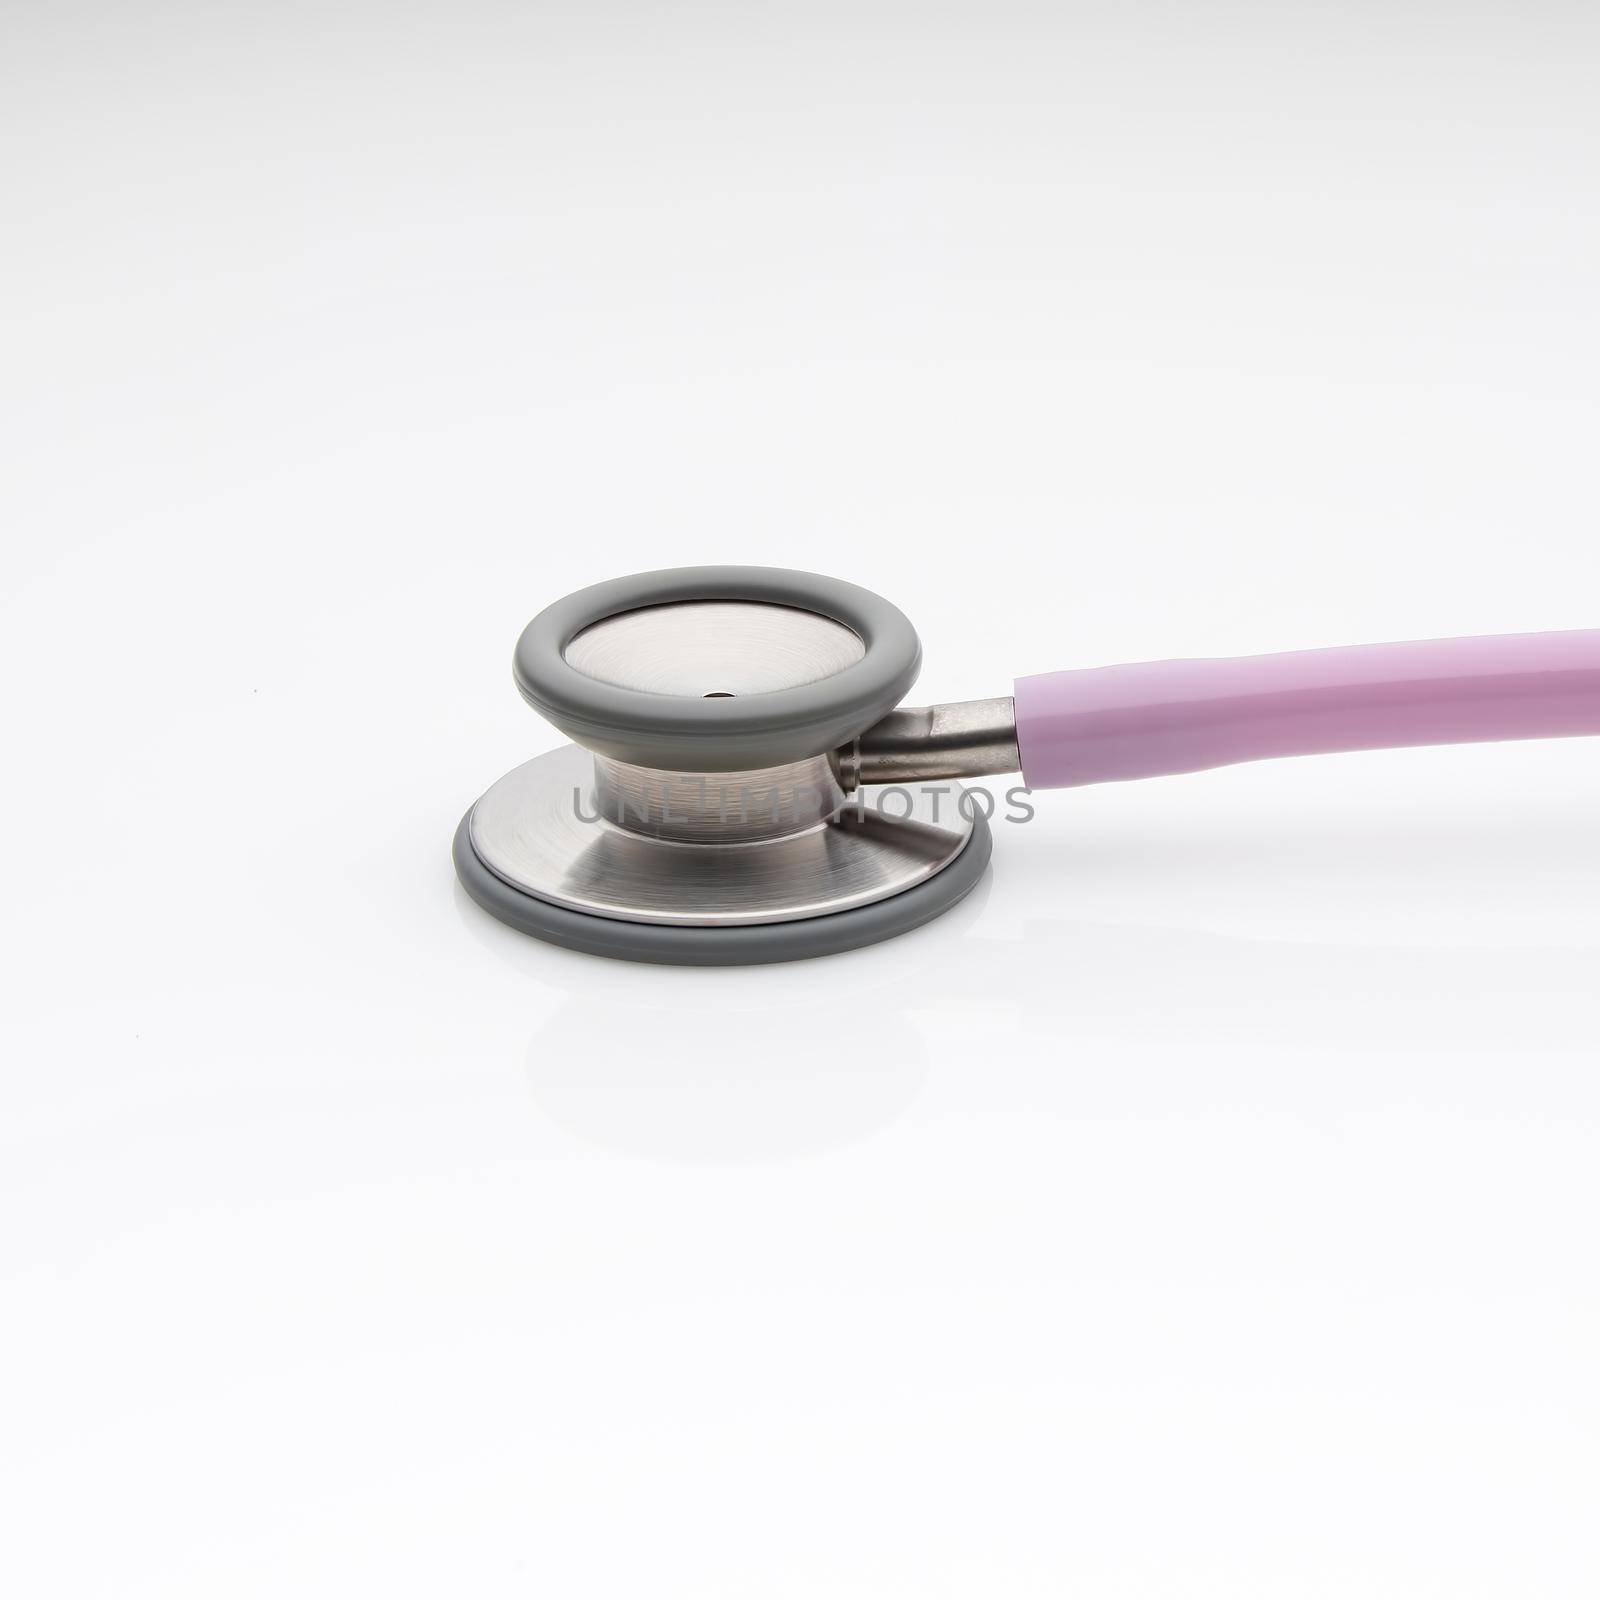 Diaphragm of medical stethoscope isolated on a white background by A_Karim